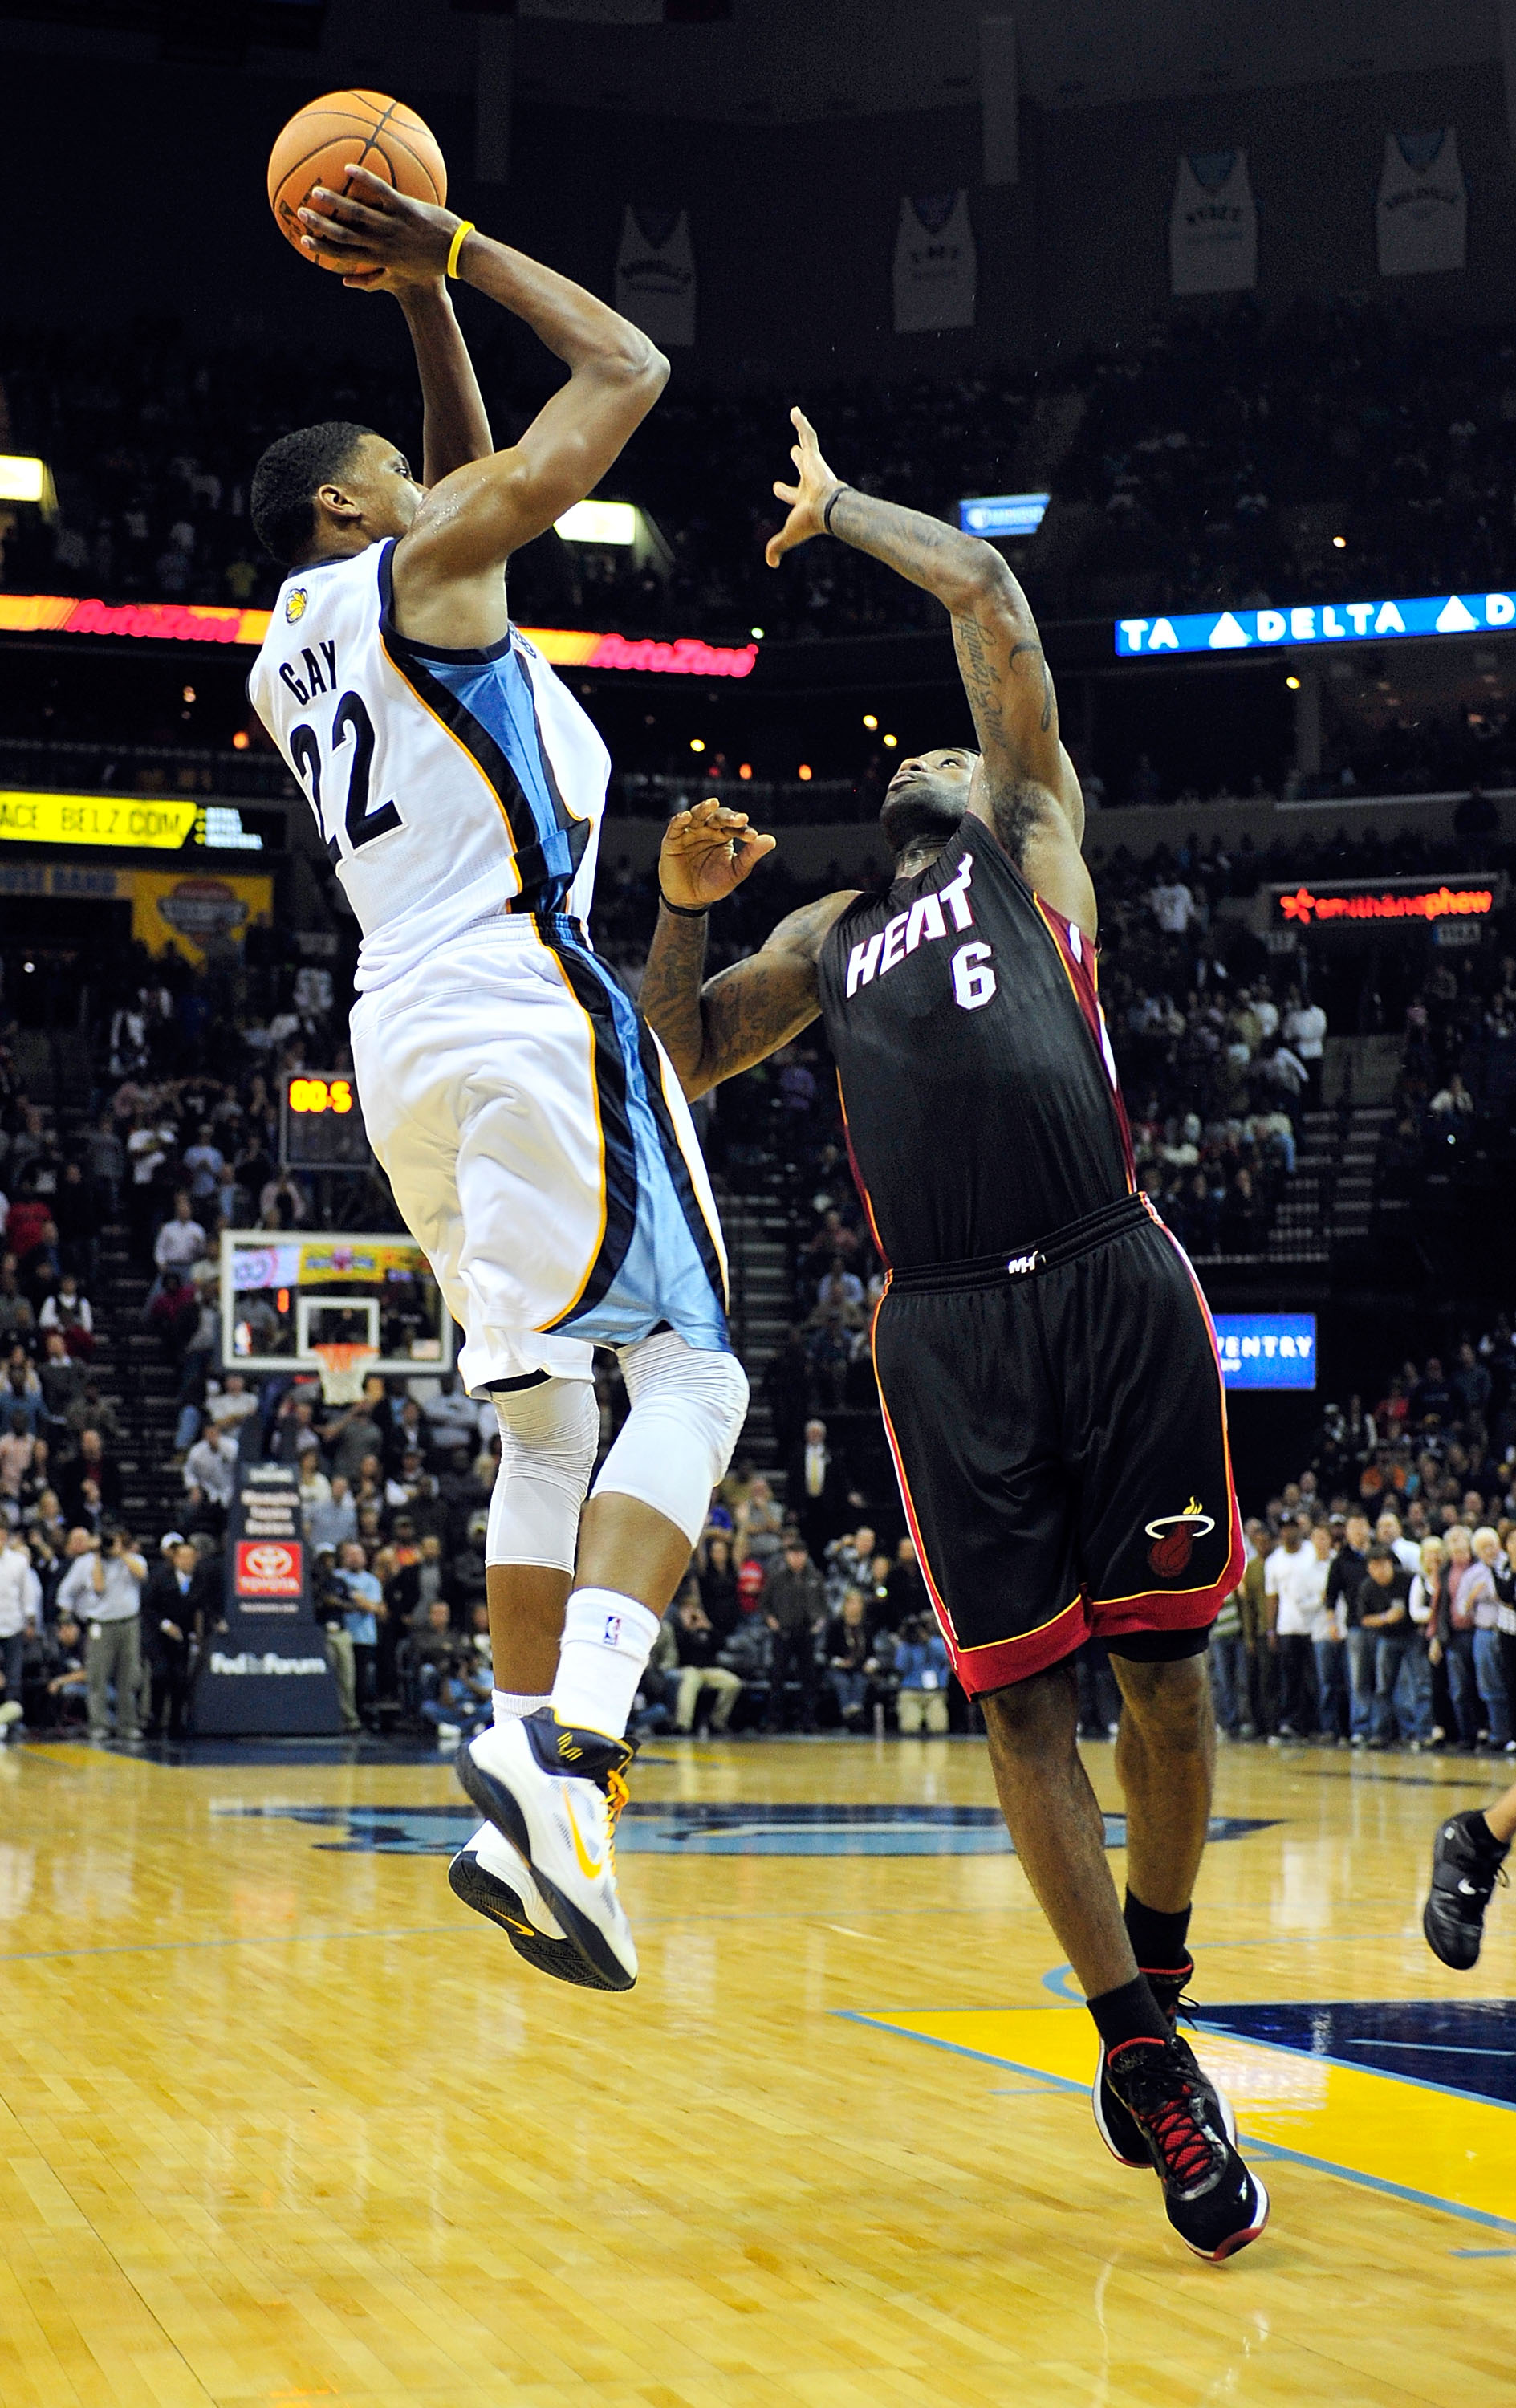 MEMPHIS, TN - NOVEMBER 20:  Rudy Gay #22 of the Memphis Grizzlies makes the game-winning basket over LeBron James #6 of the Miami Heat as time expires at FedExForum on November 20, 2010 in Memphis, Tennessee. The Grizzlies won 97-95. NOTE TO USER: User ex